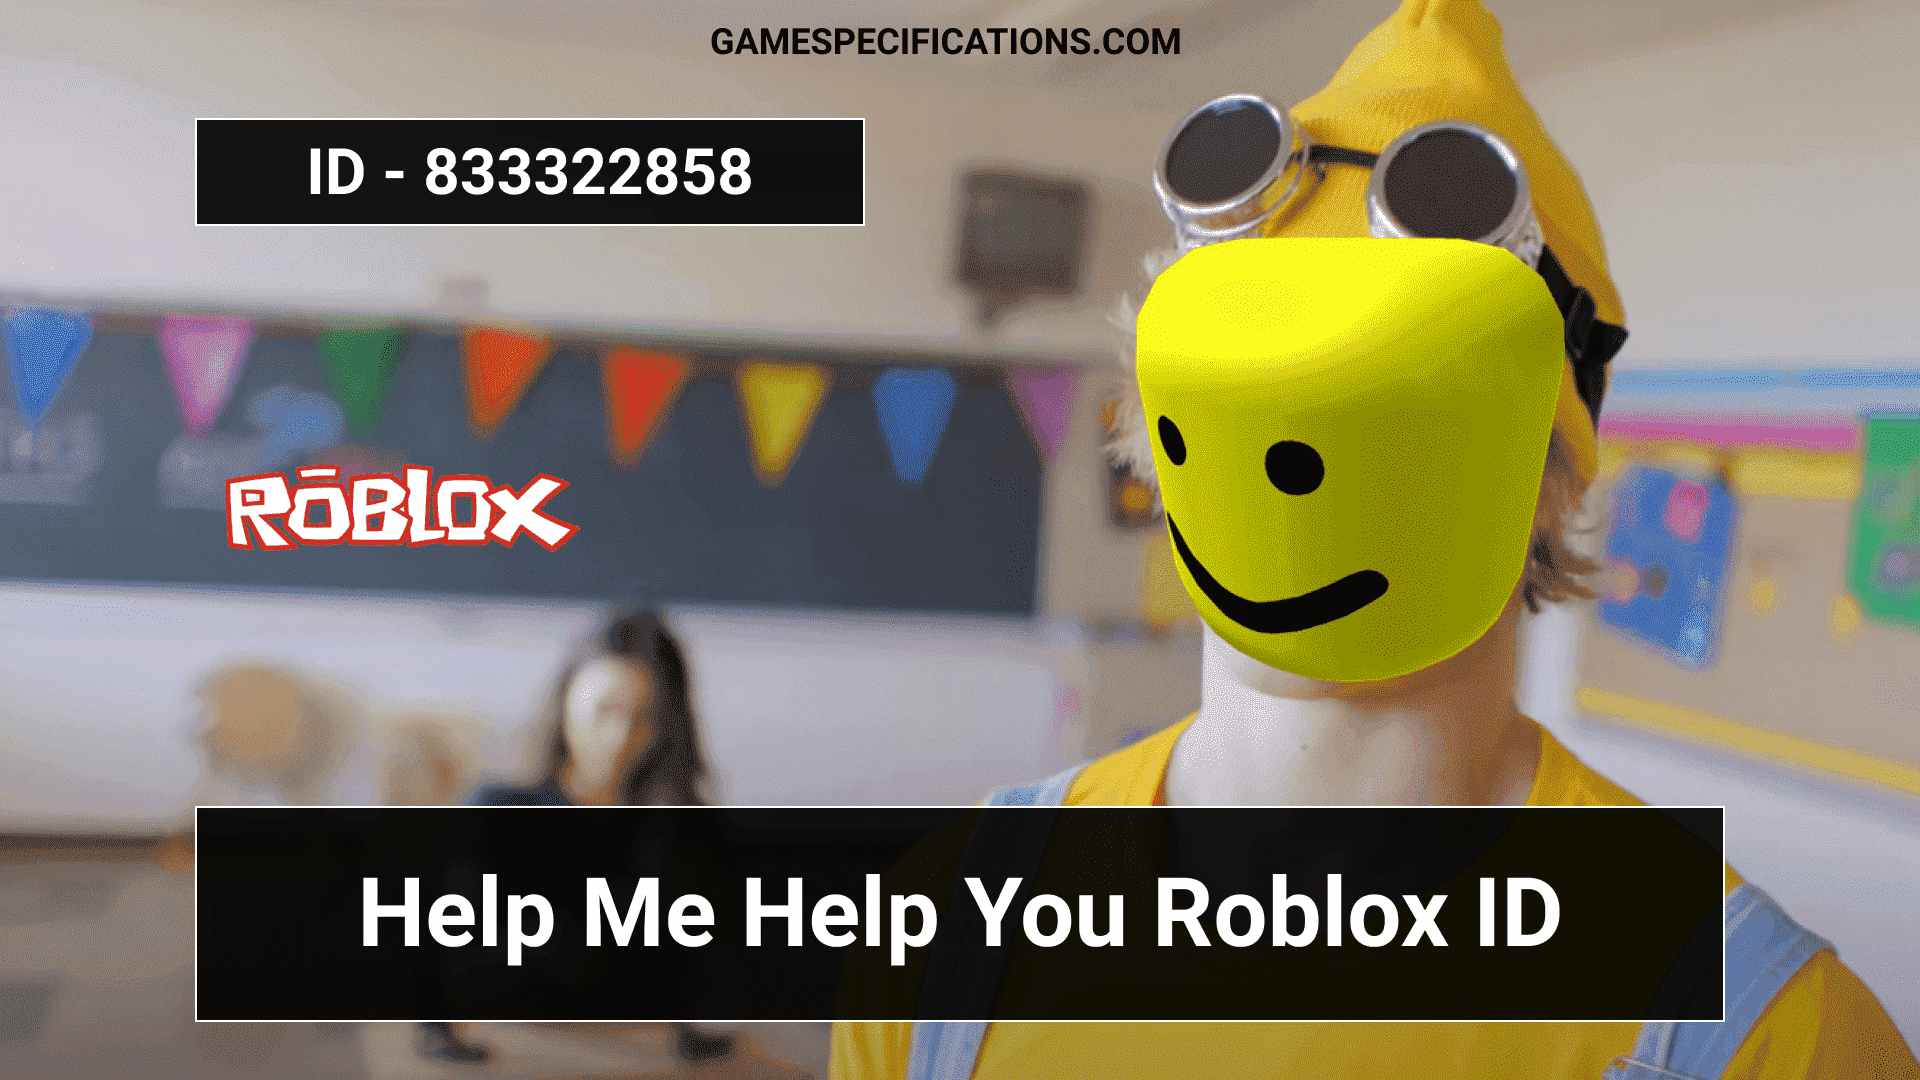 Help Me Help You Roblox Id Codes To Brighten Your Day 2021 Game Specifications - help me help you roblox id code